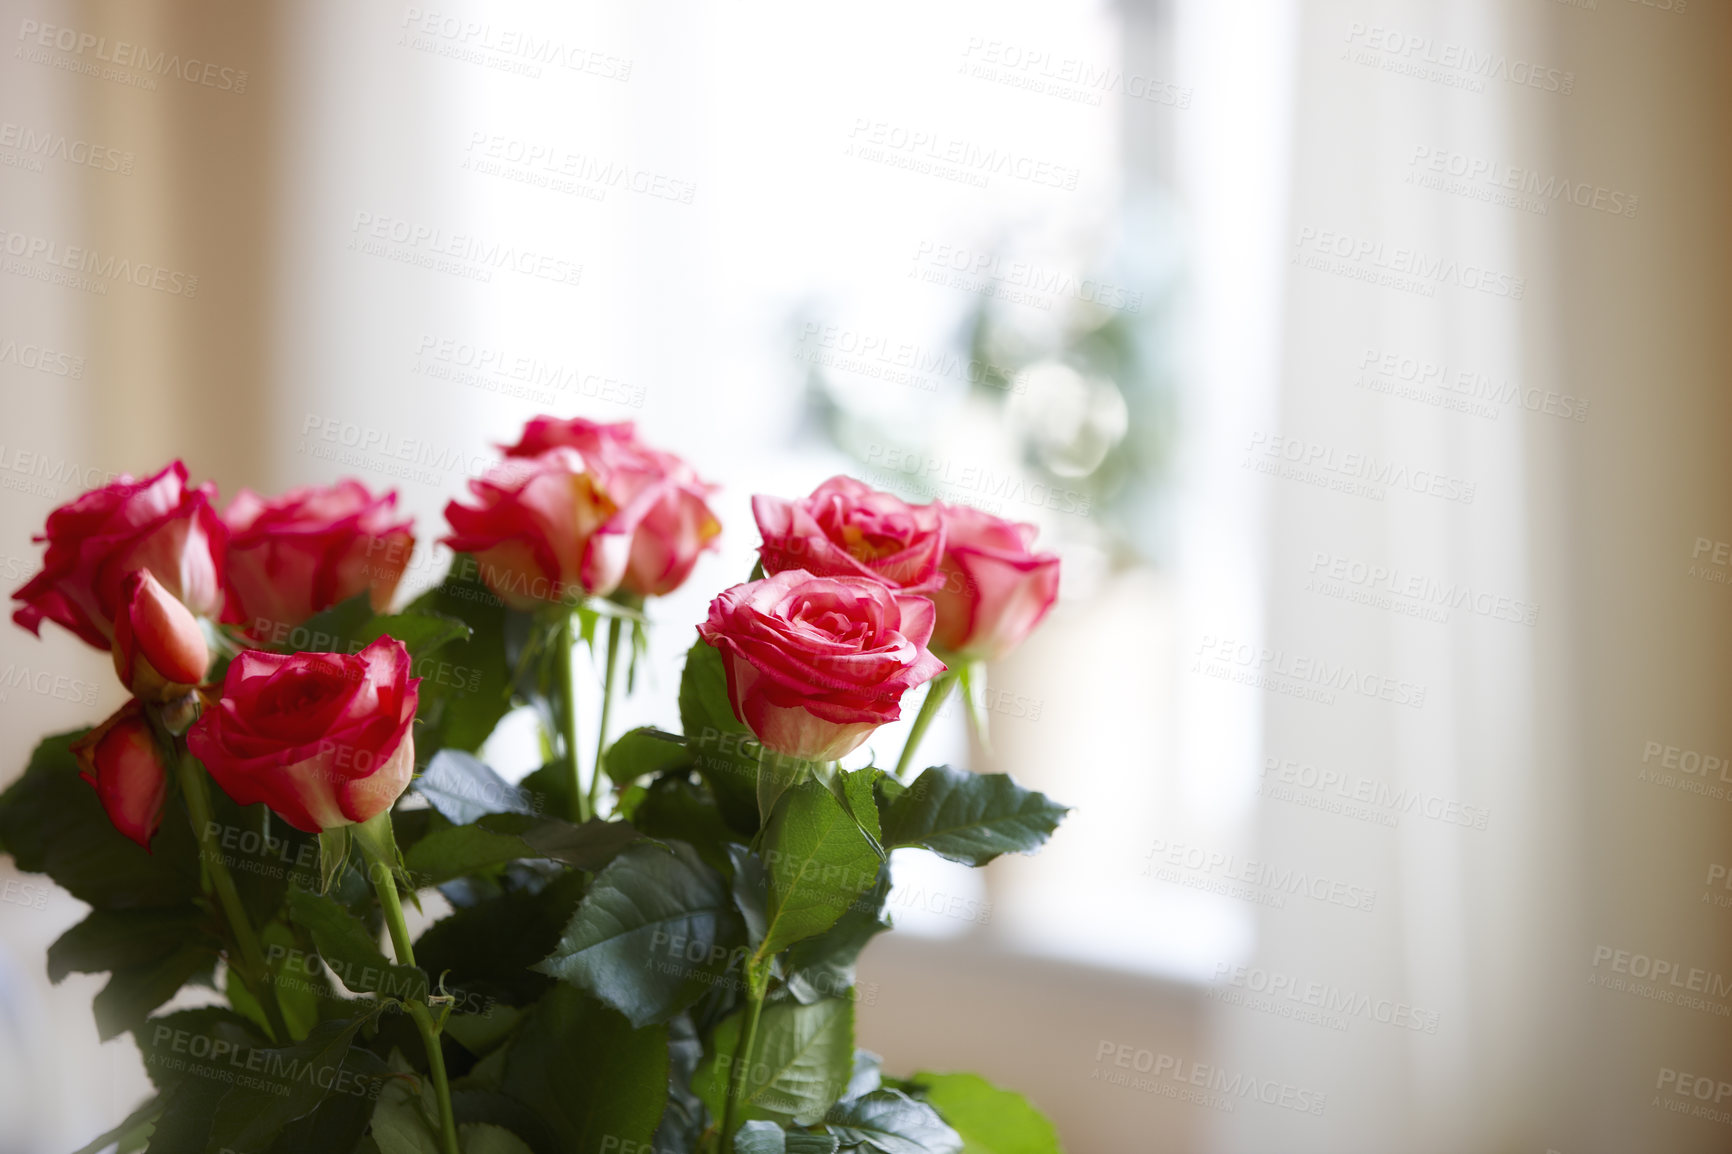 Buy stock photo A photo of Roses indoor with window as background